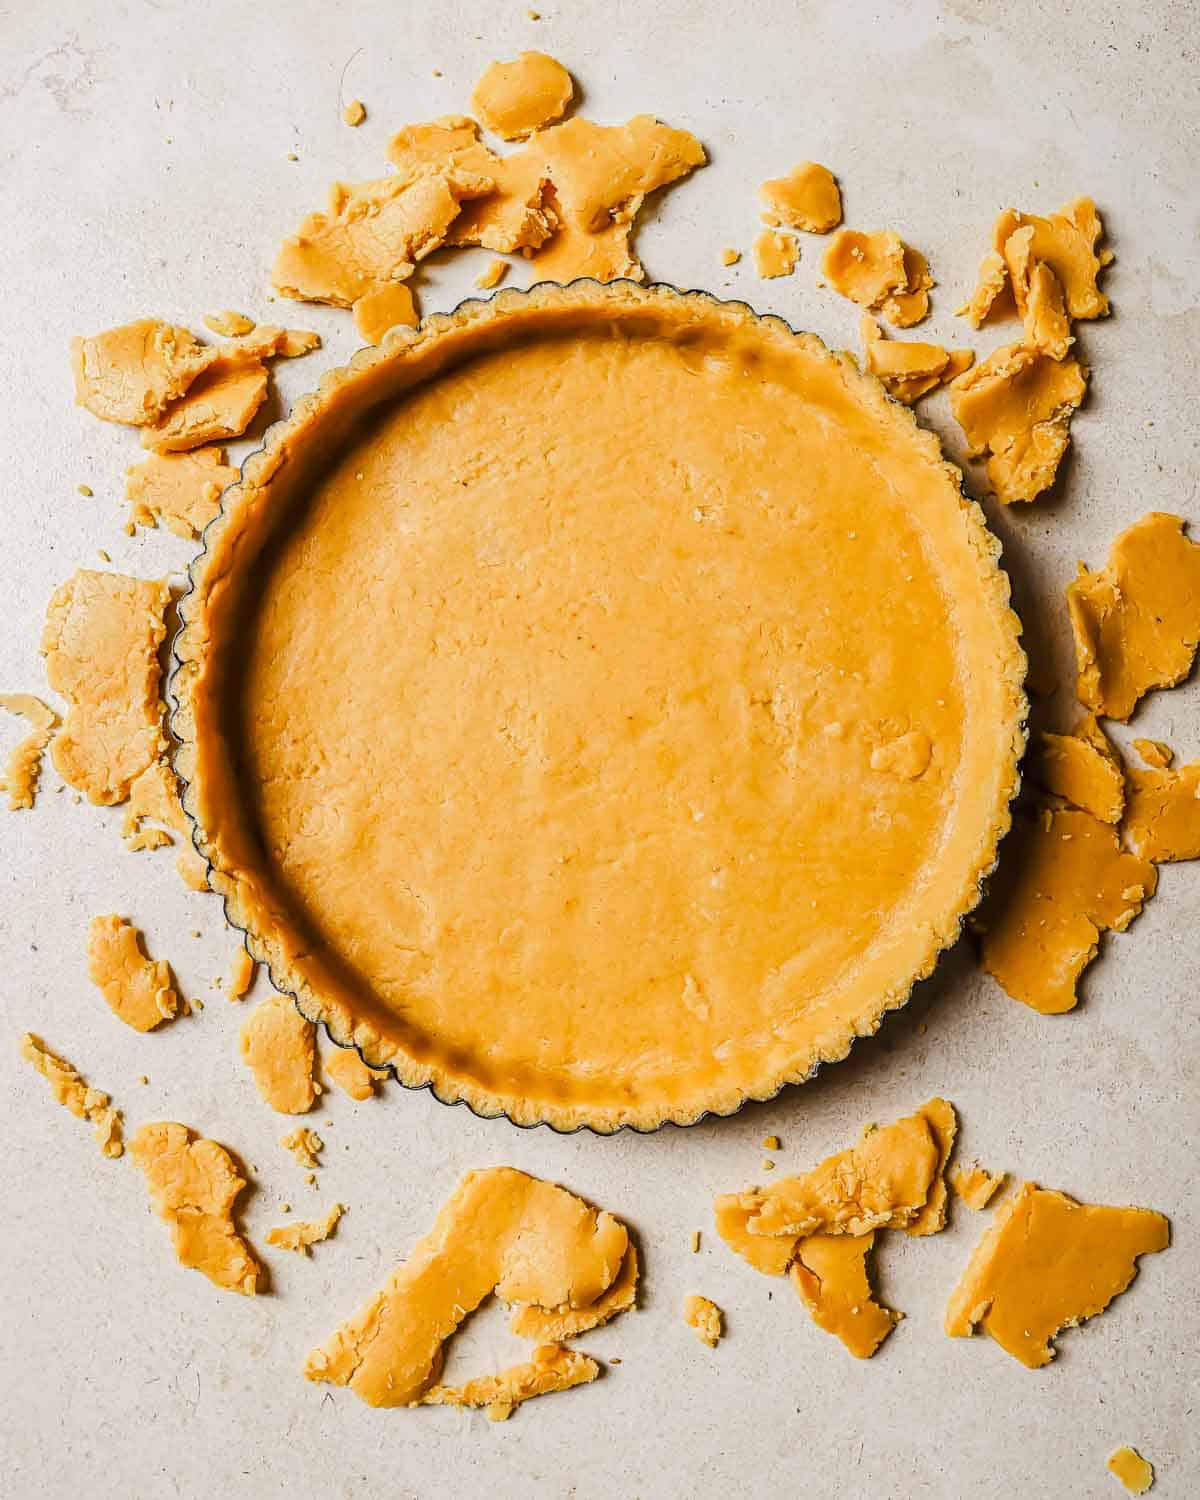 Unbaked tart crust pressed into a tart pan surrounded by scattered crust pieces on a light beige surface.